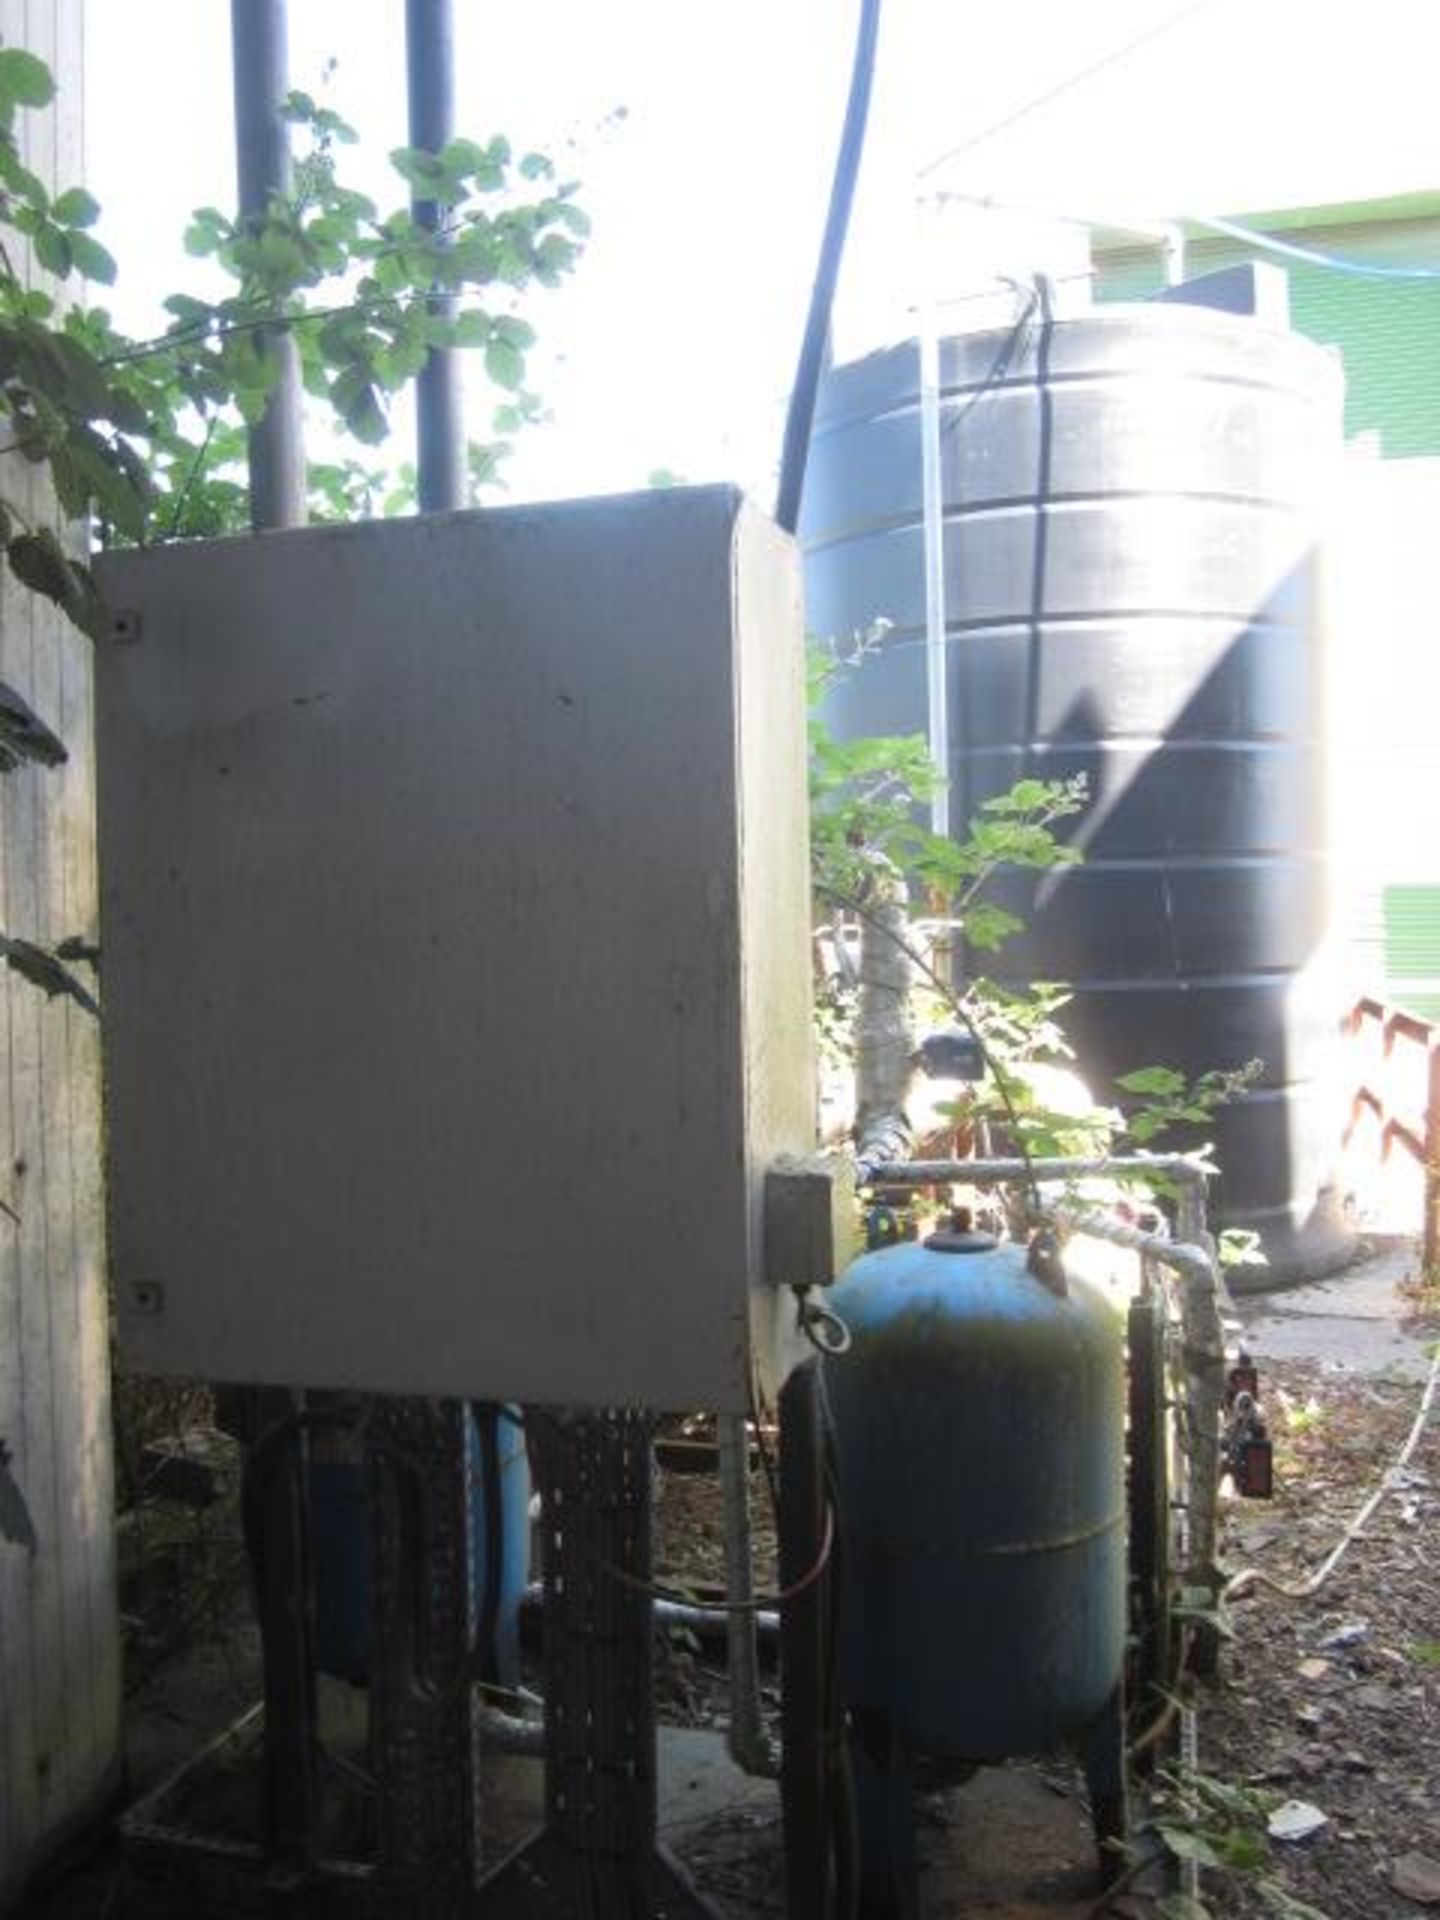 Steel framed skid mounted water pump system, to include 2 Armstrong fire pumps, two water receiver - Image 3 of 3